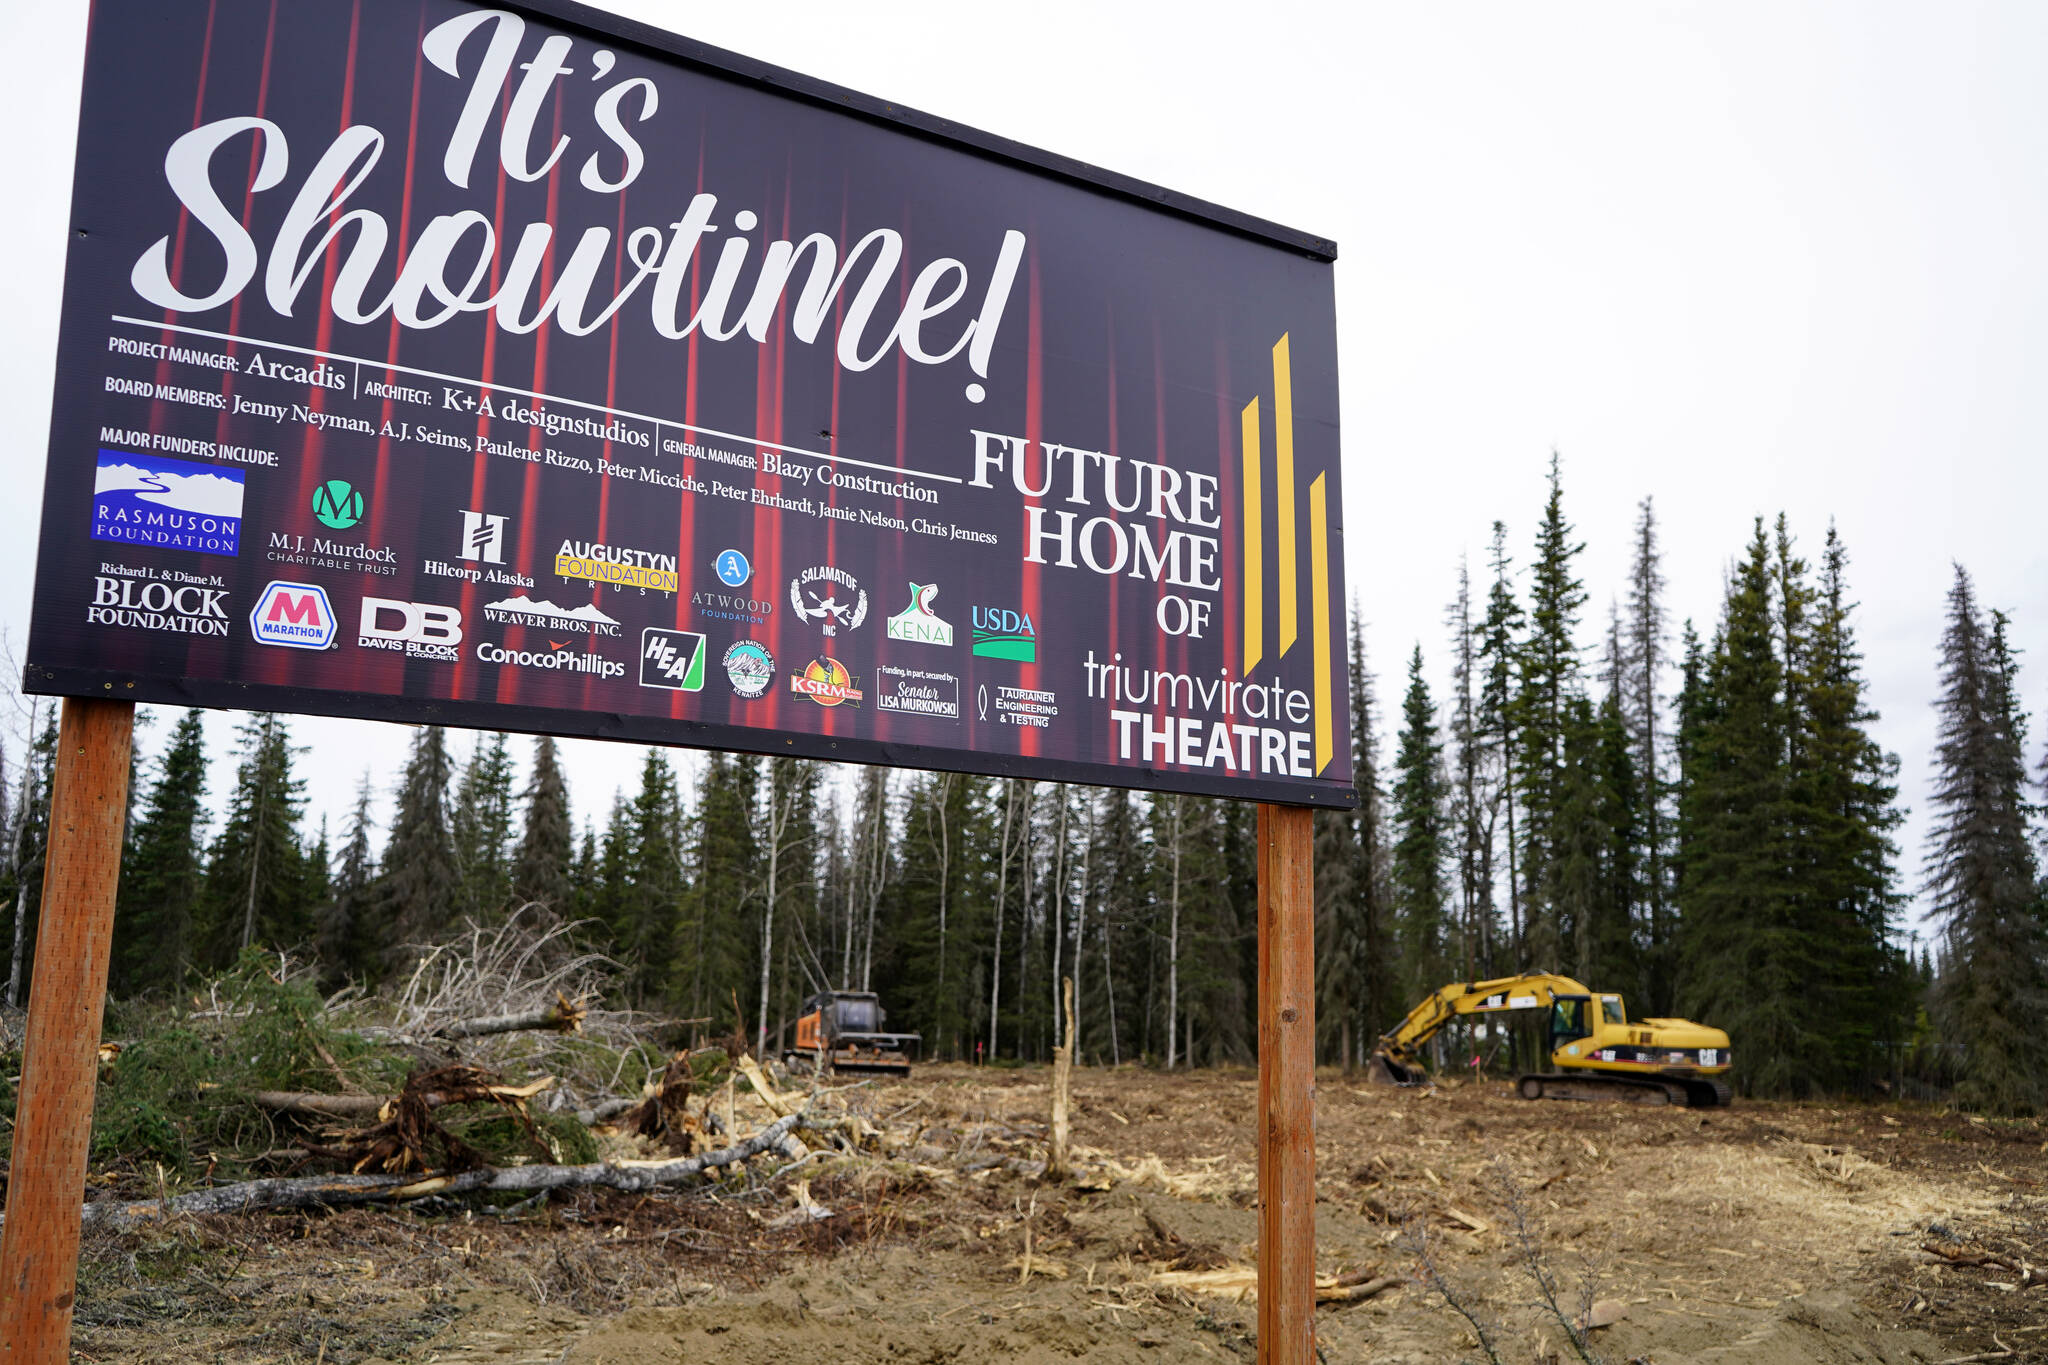 Construction equipment can be seen at the site of the “Future Home of Triumvirate Theatre” in Kenai, Alaska, on Wednesday, May 1, 2024. (Jake Dye/Peninsula Clarion)